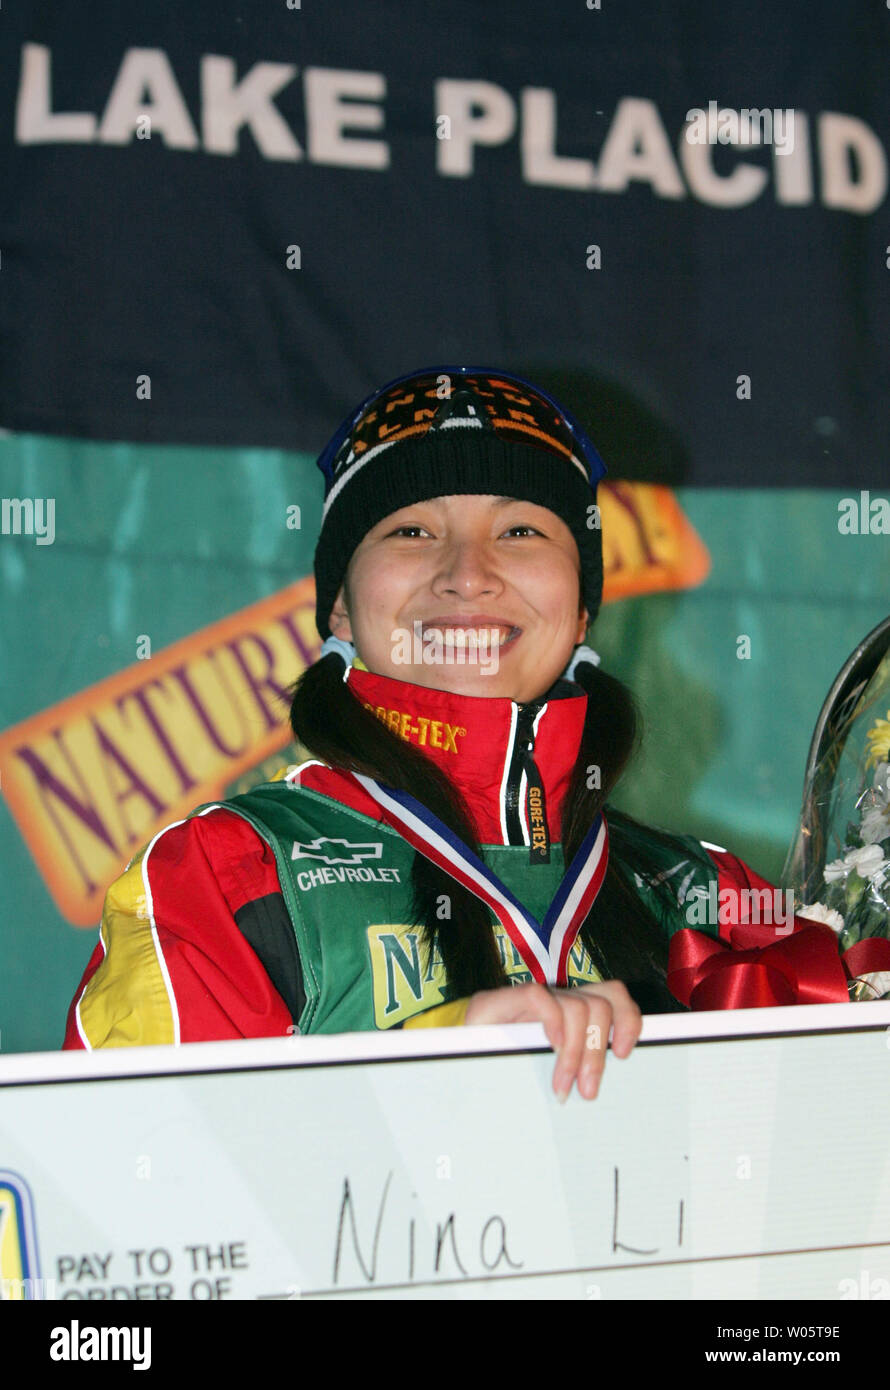 Chinese aerialist LI Nina, 22, accepts a gold medal and cheque for winning the Freestyle World Cup event in Lake Placid, NY on January 14, 2005.  Miss Li of Shenyang, China, tallied 96.56 points ahead of Australian Lydia Ierodiaconou (94.25), who leads the world cup standings.  (UPI Photo / Grace Chiu) Stock Photo